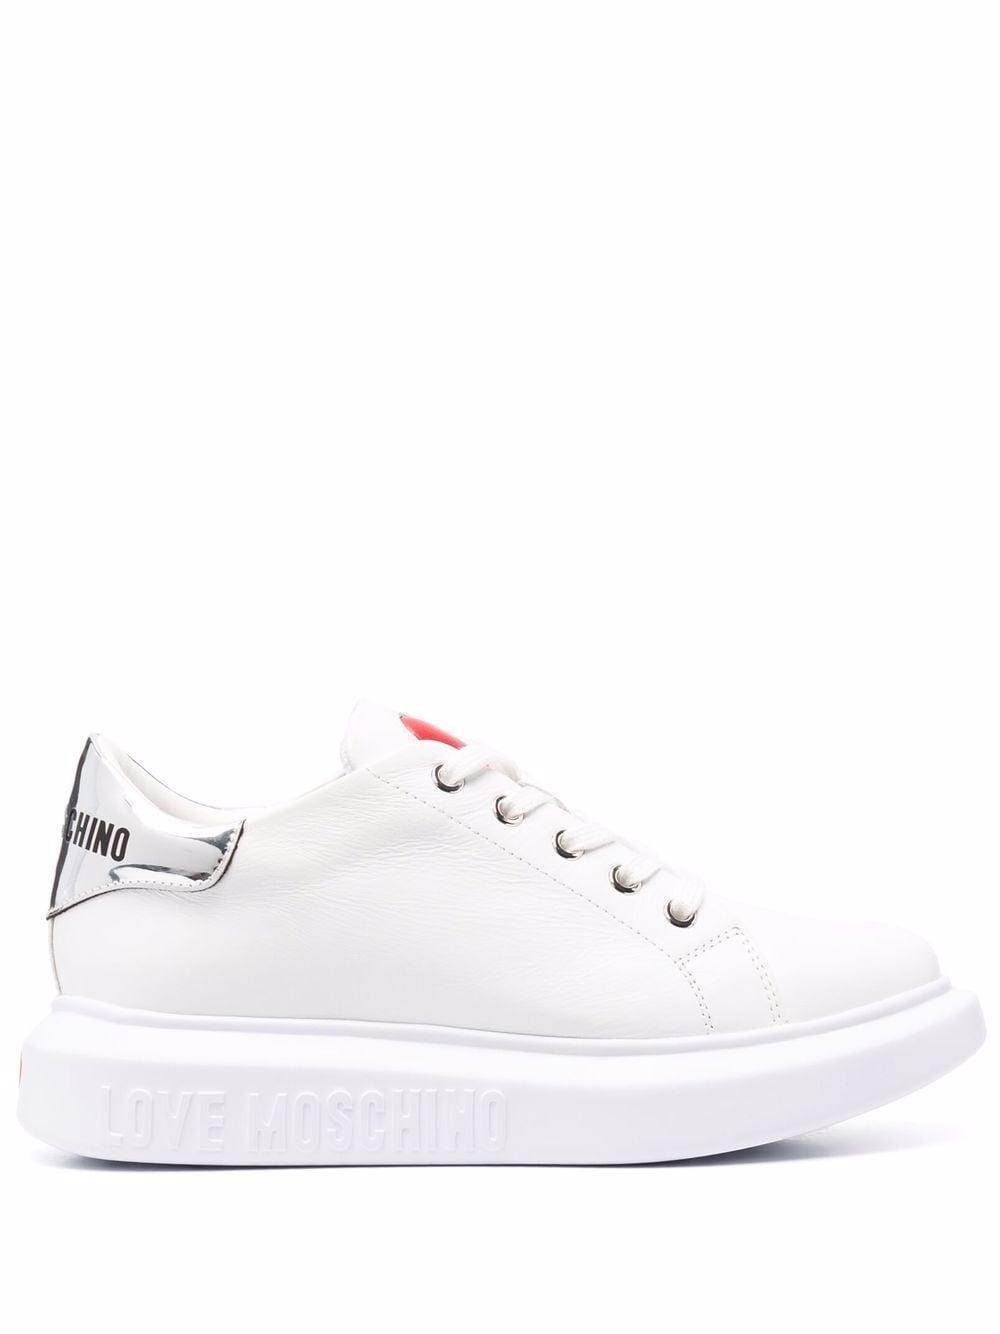 Love Moschino Heart-motif Leather Sneakers in White - Save 37% | Lyst